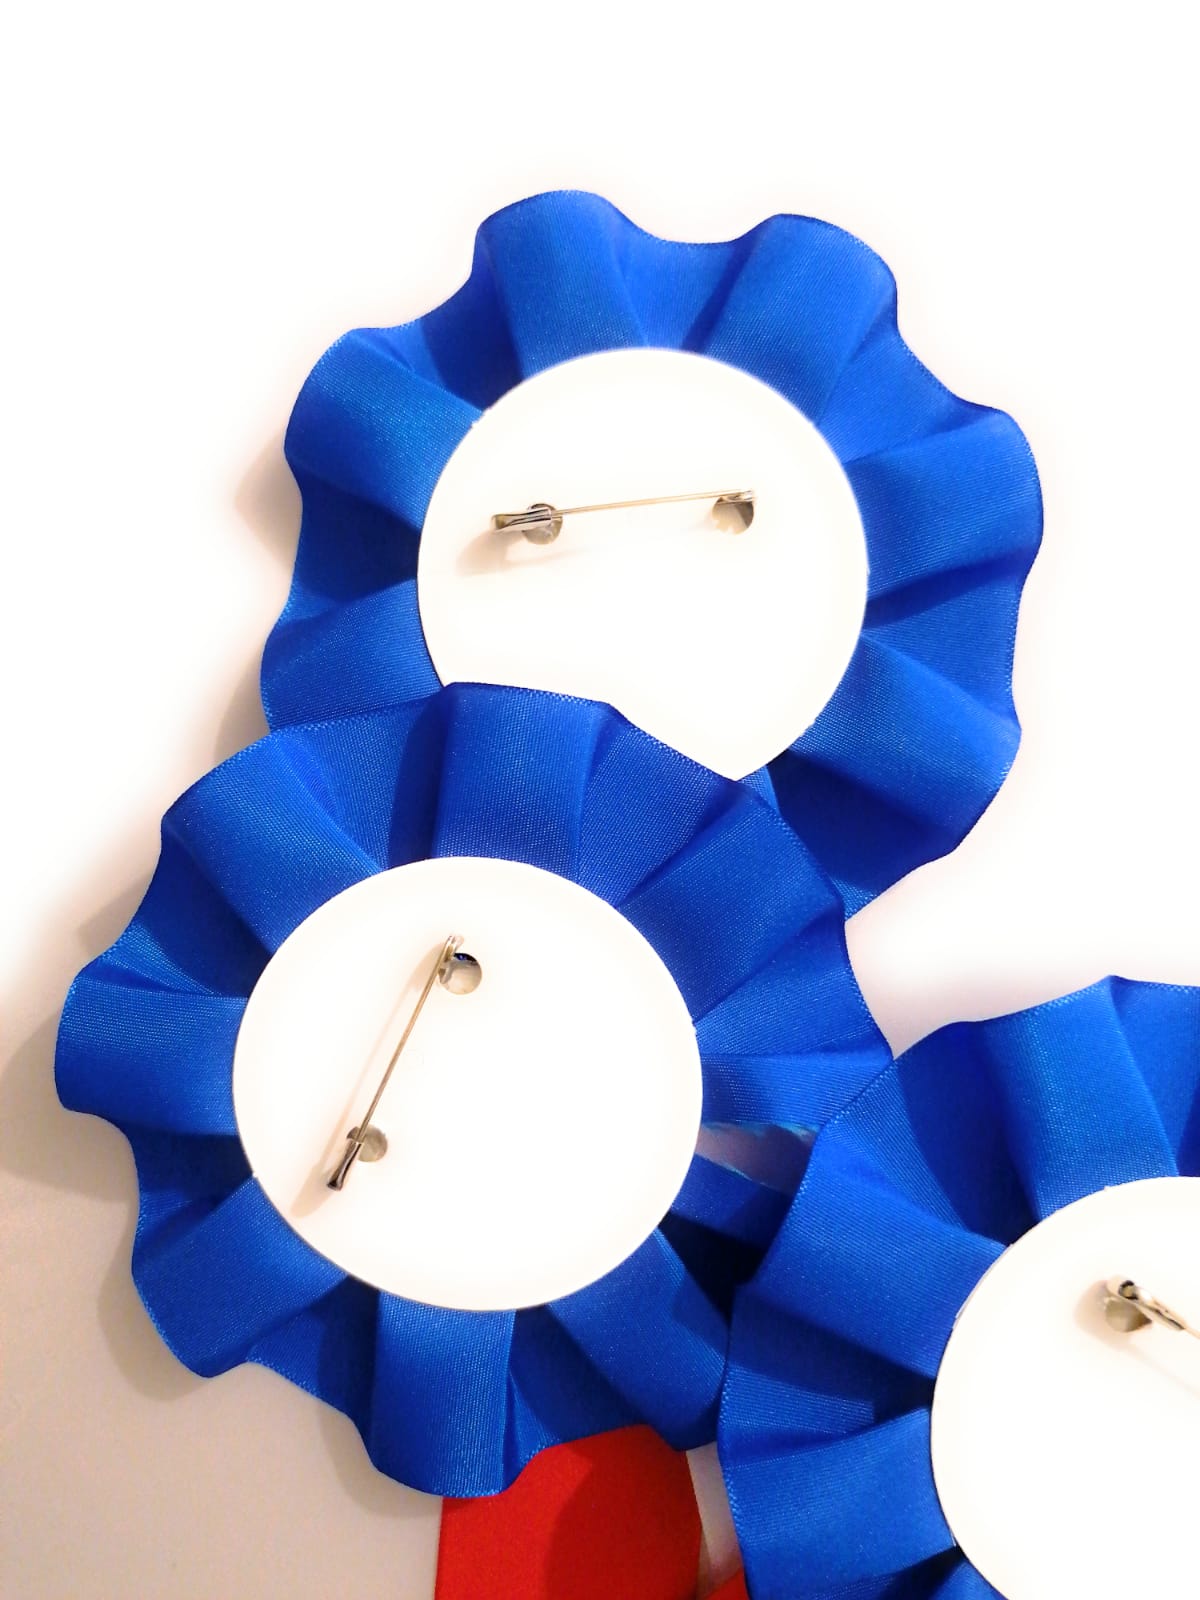 10 X Blue and White Rosettes